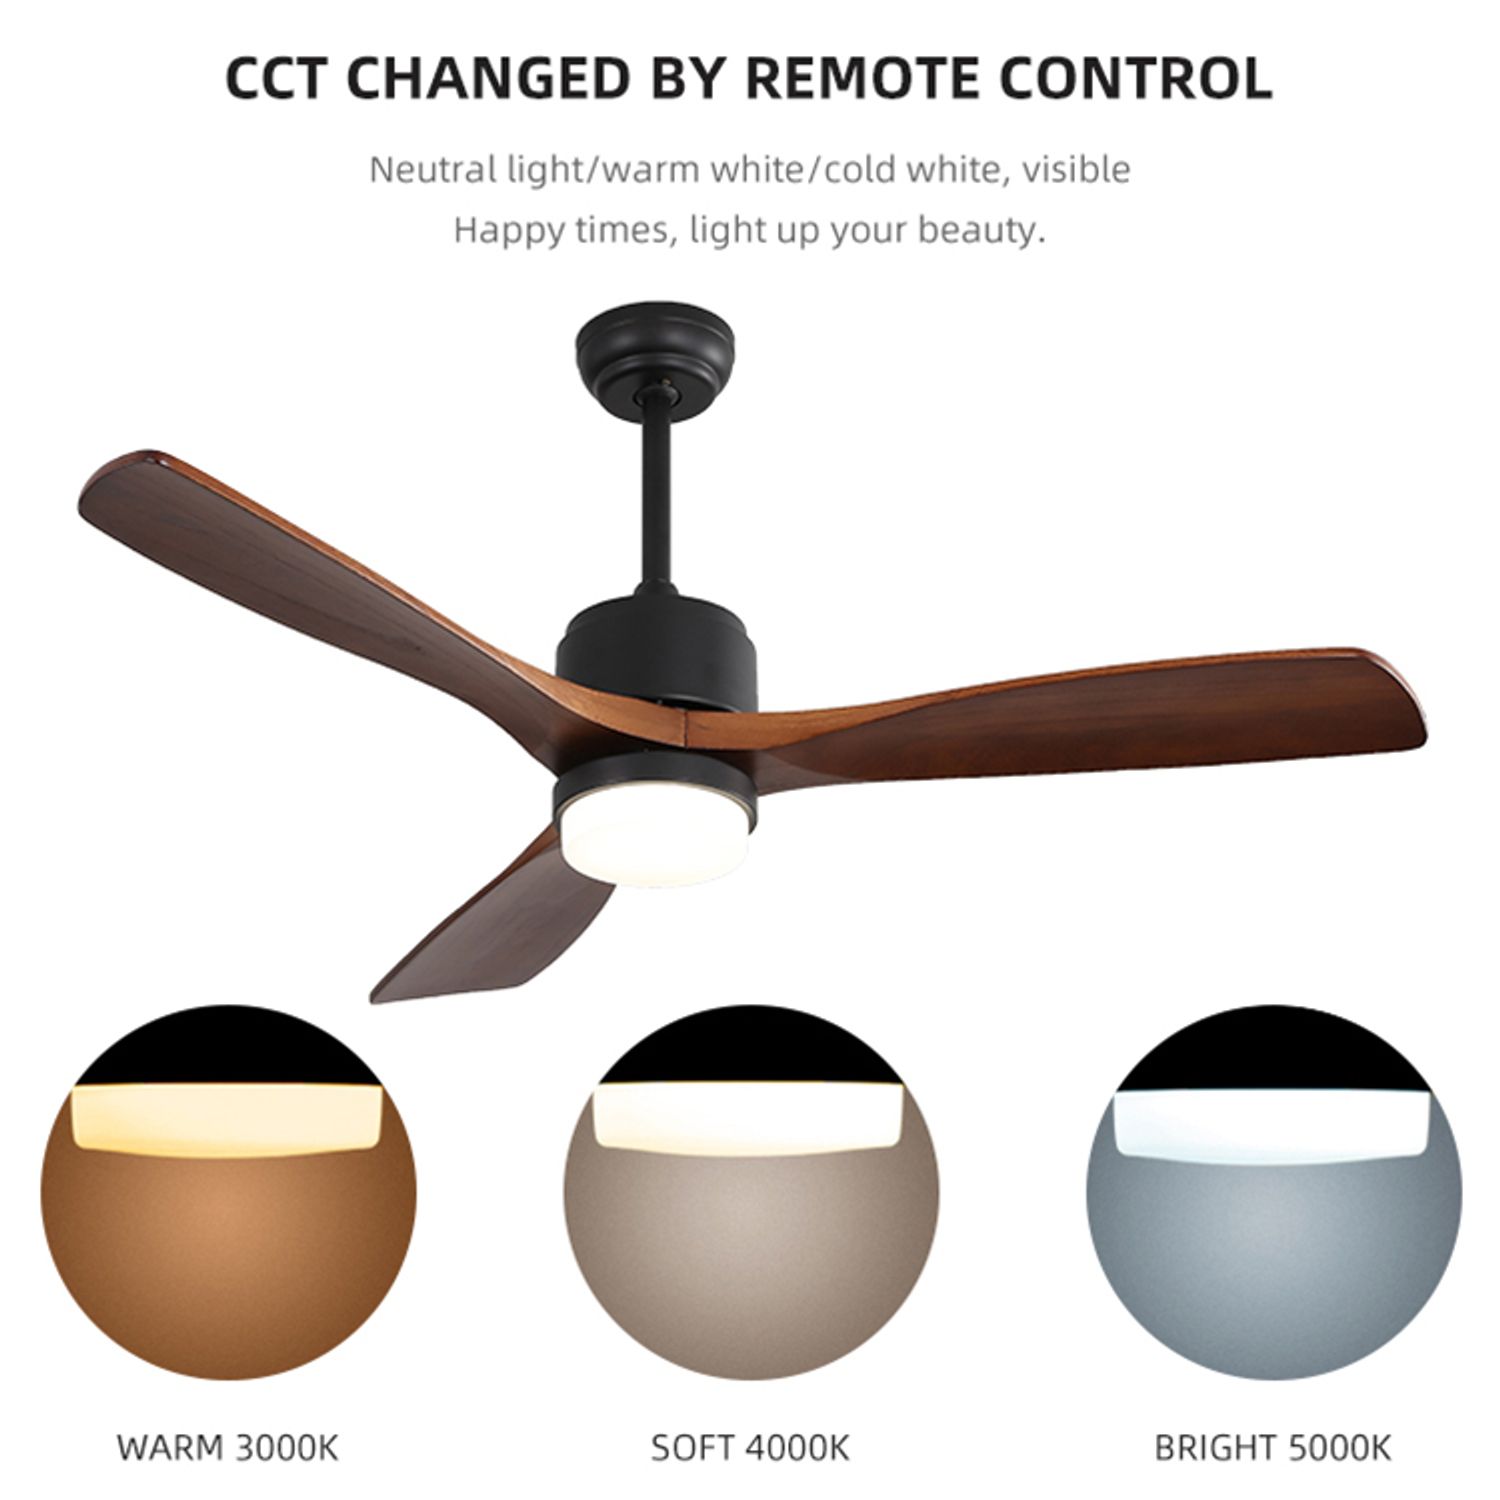 3 Dimmable light of wood propeller quiet ceiling fans with remote control